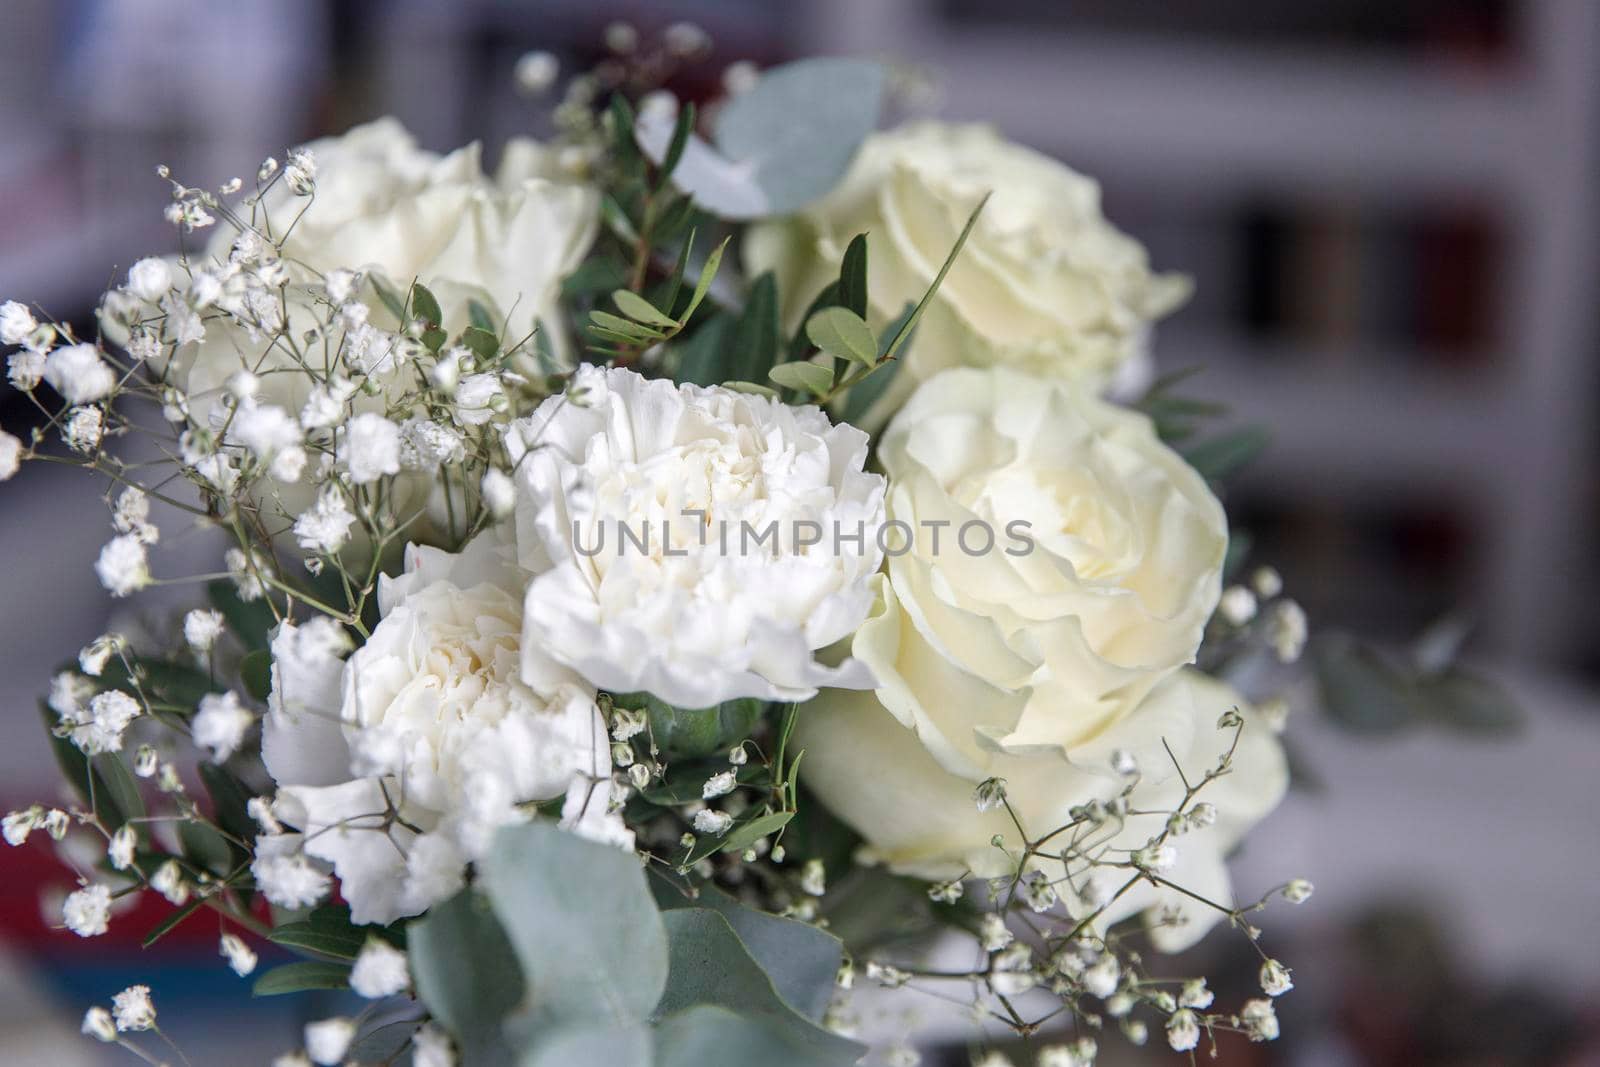 White roses, terry carnations, lisianthus, gypsophila and eucalyptus are in the bride's wedding bouquet